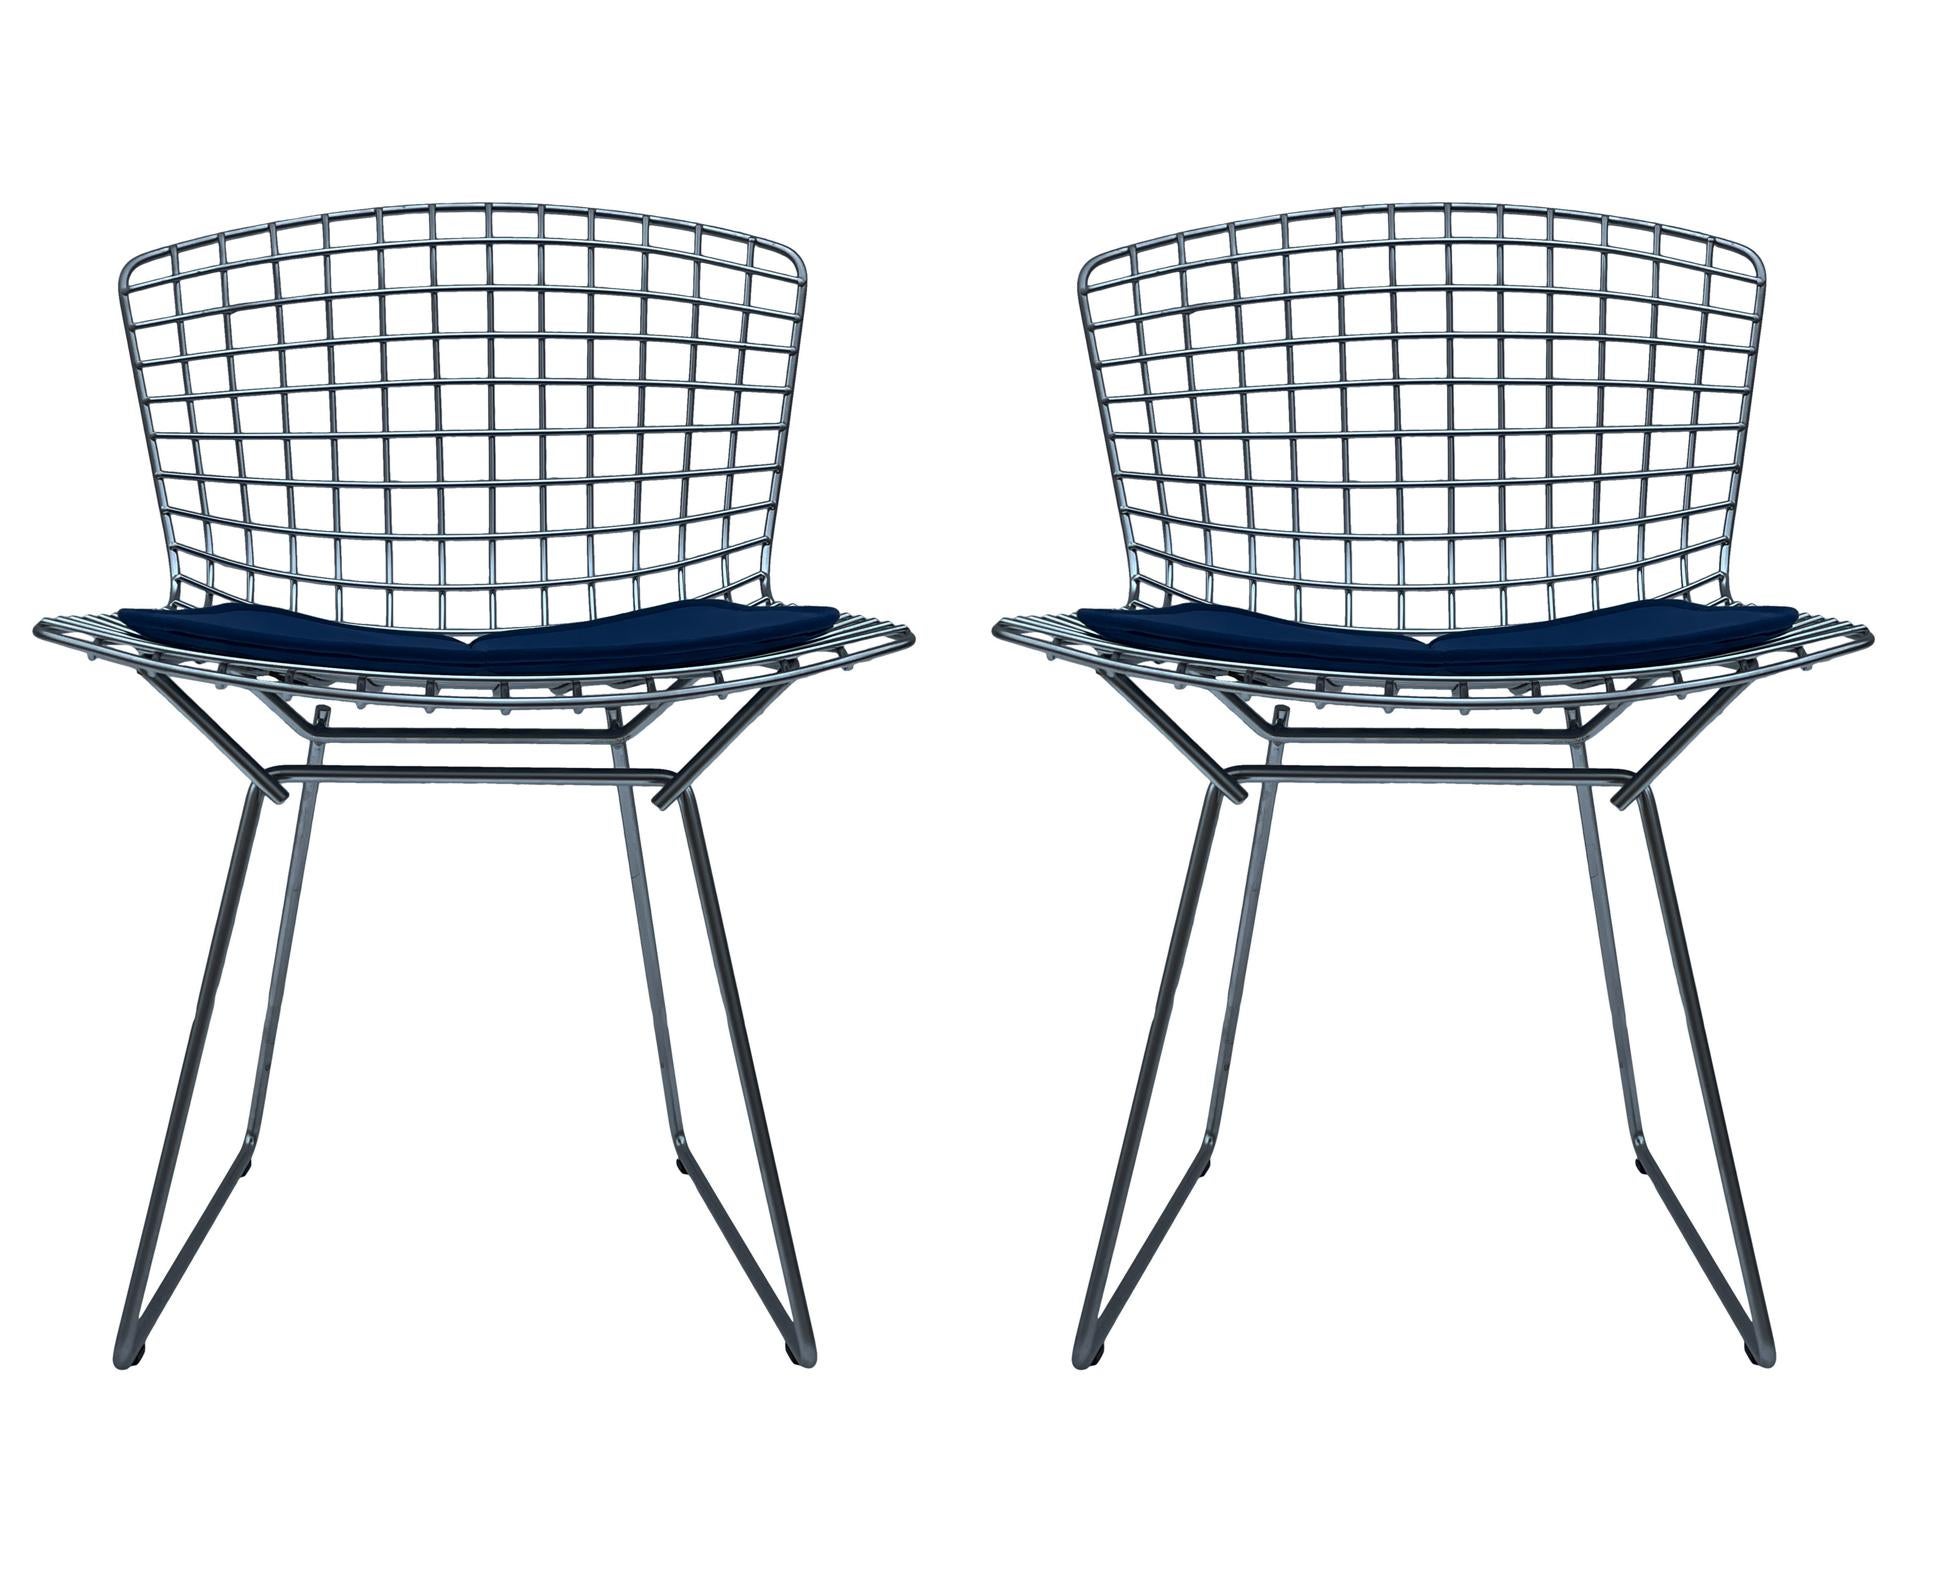 Pair of Mid-Century Modern Wire Side or Dining Chairs by Harry Bertoia for Knoll 3